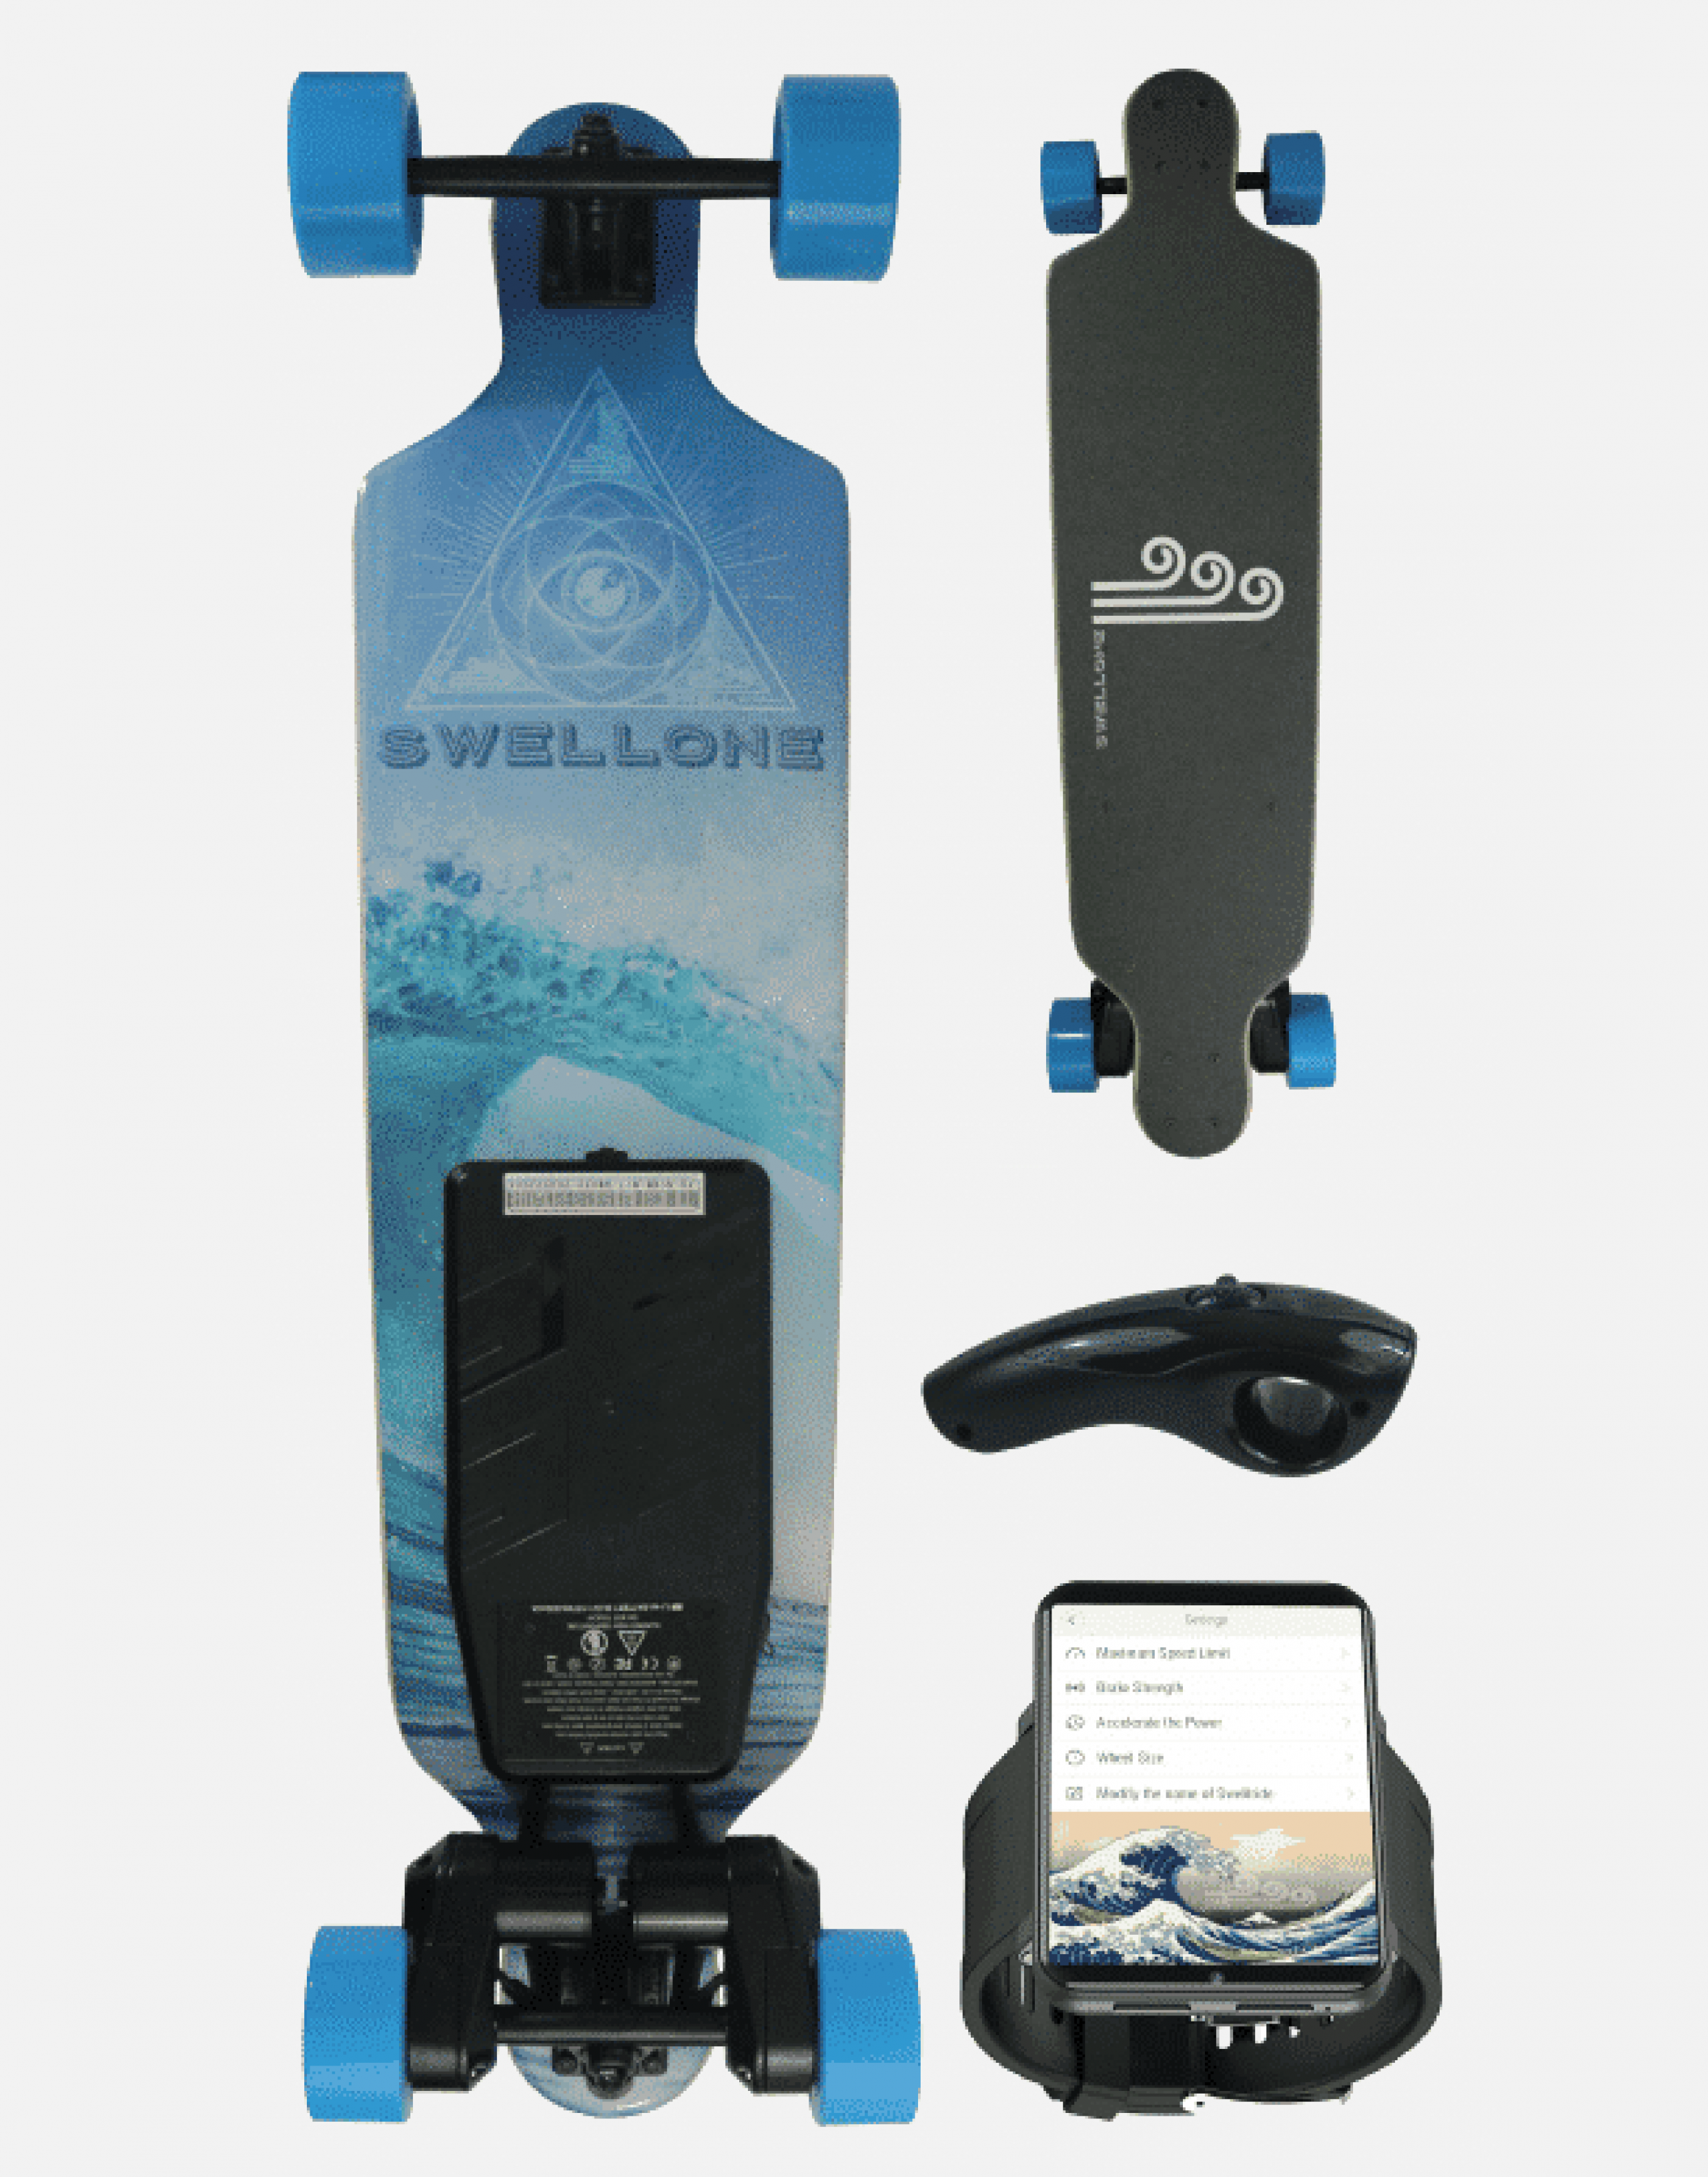 Swellone Swellride electric longboard with controller & smart watch.